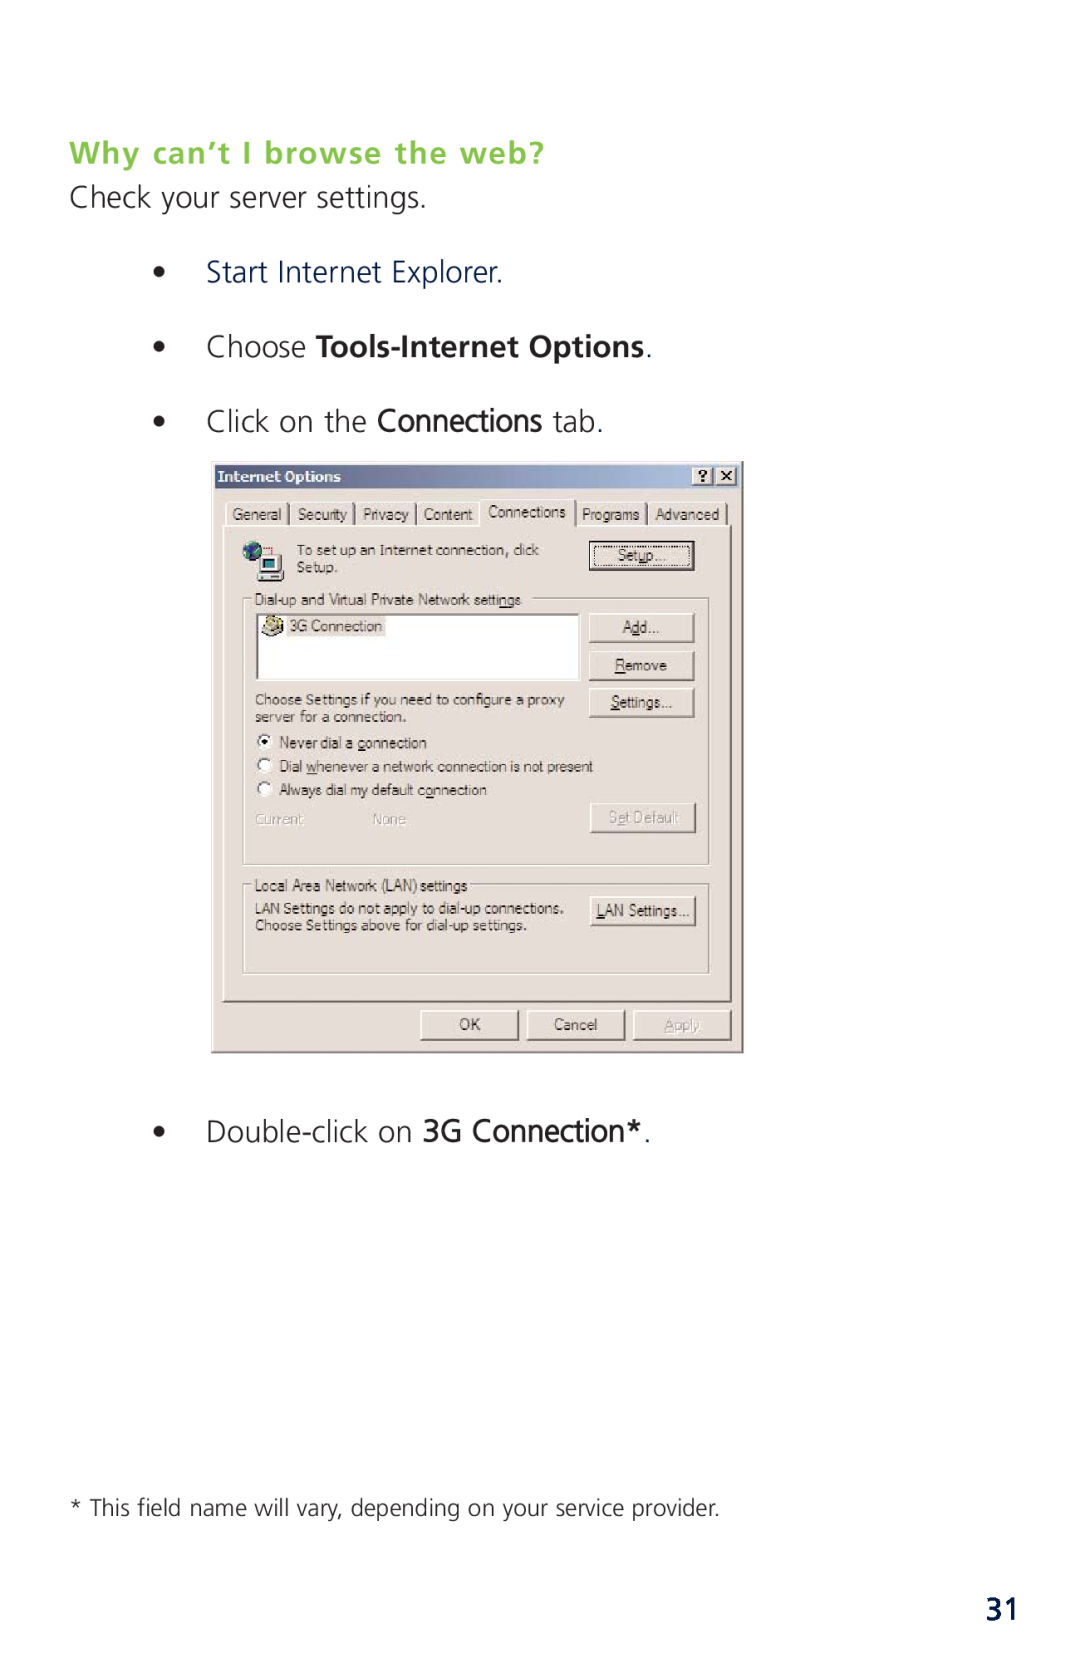 Novatel XU870 manual Why can’t I browse the web?, Choose Toolsnet Options 